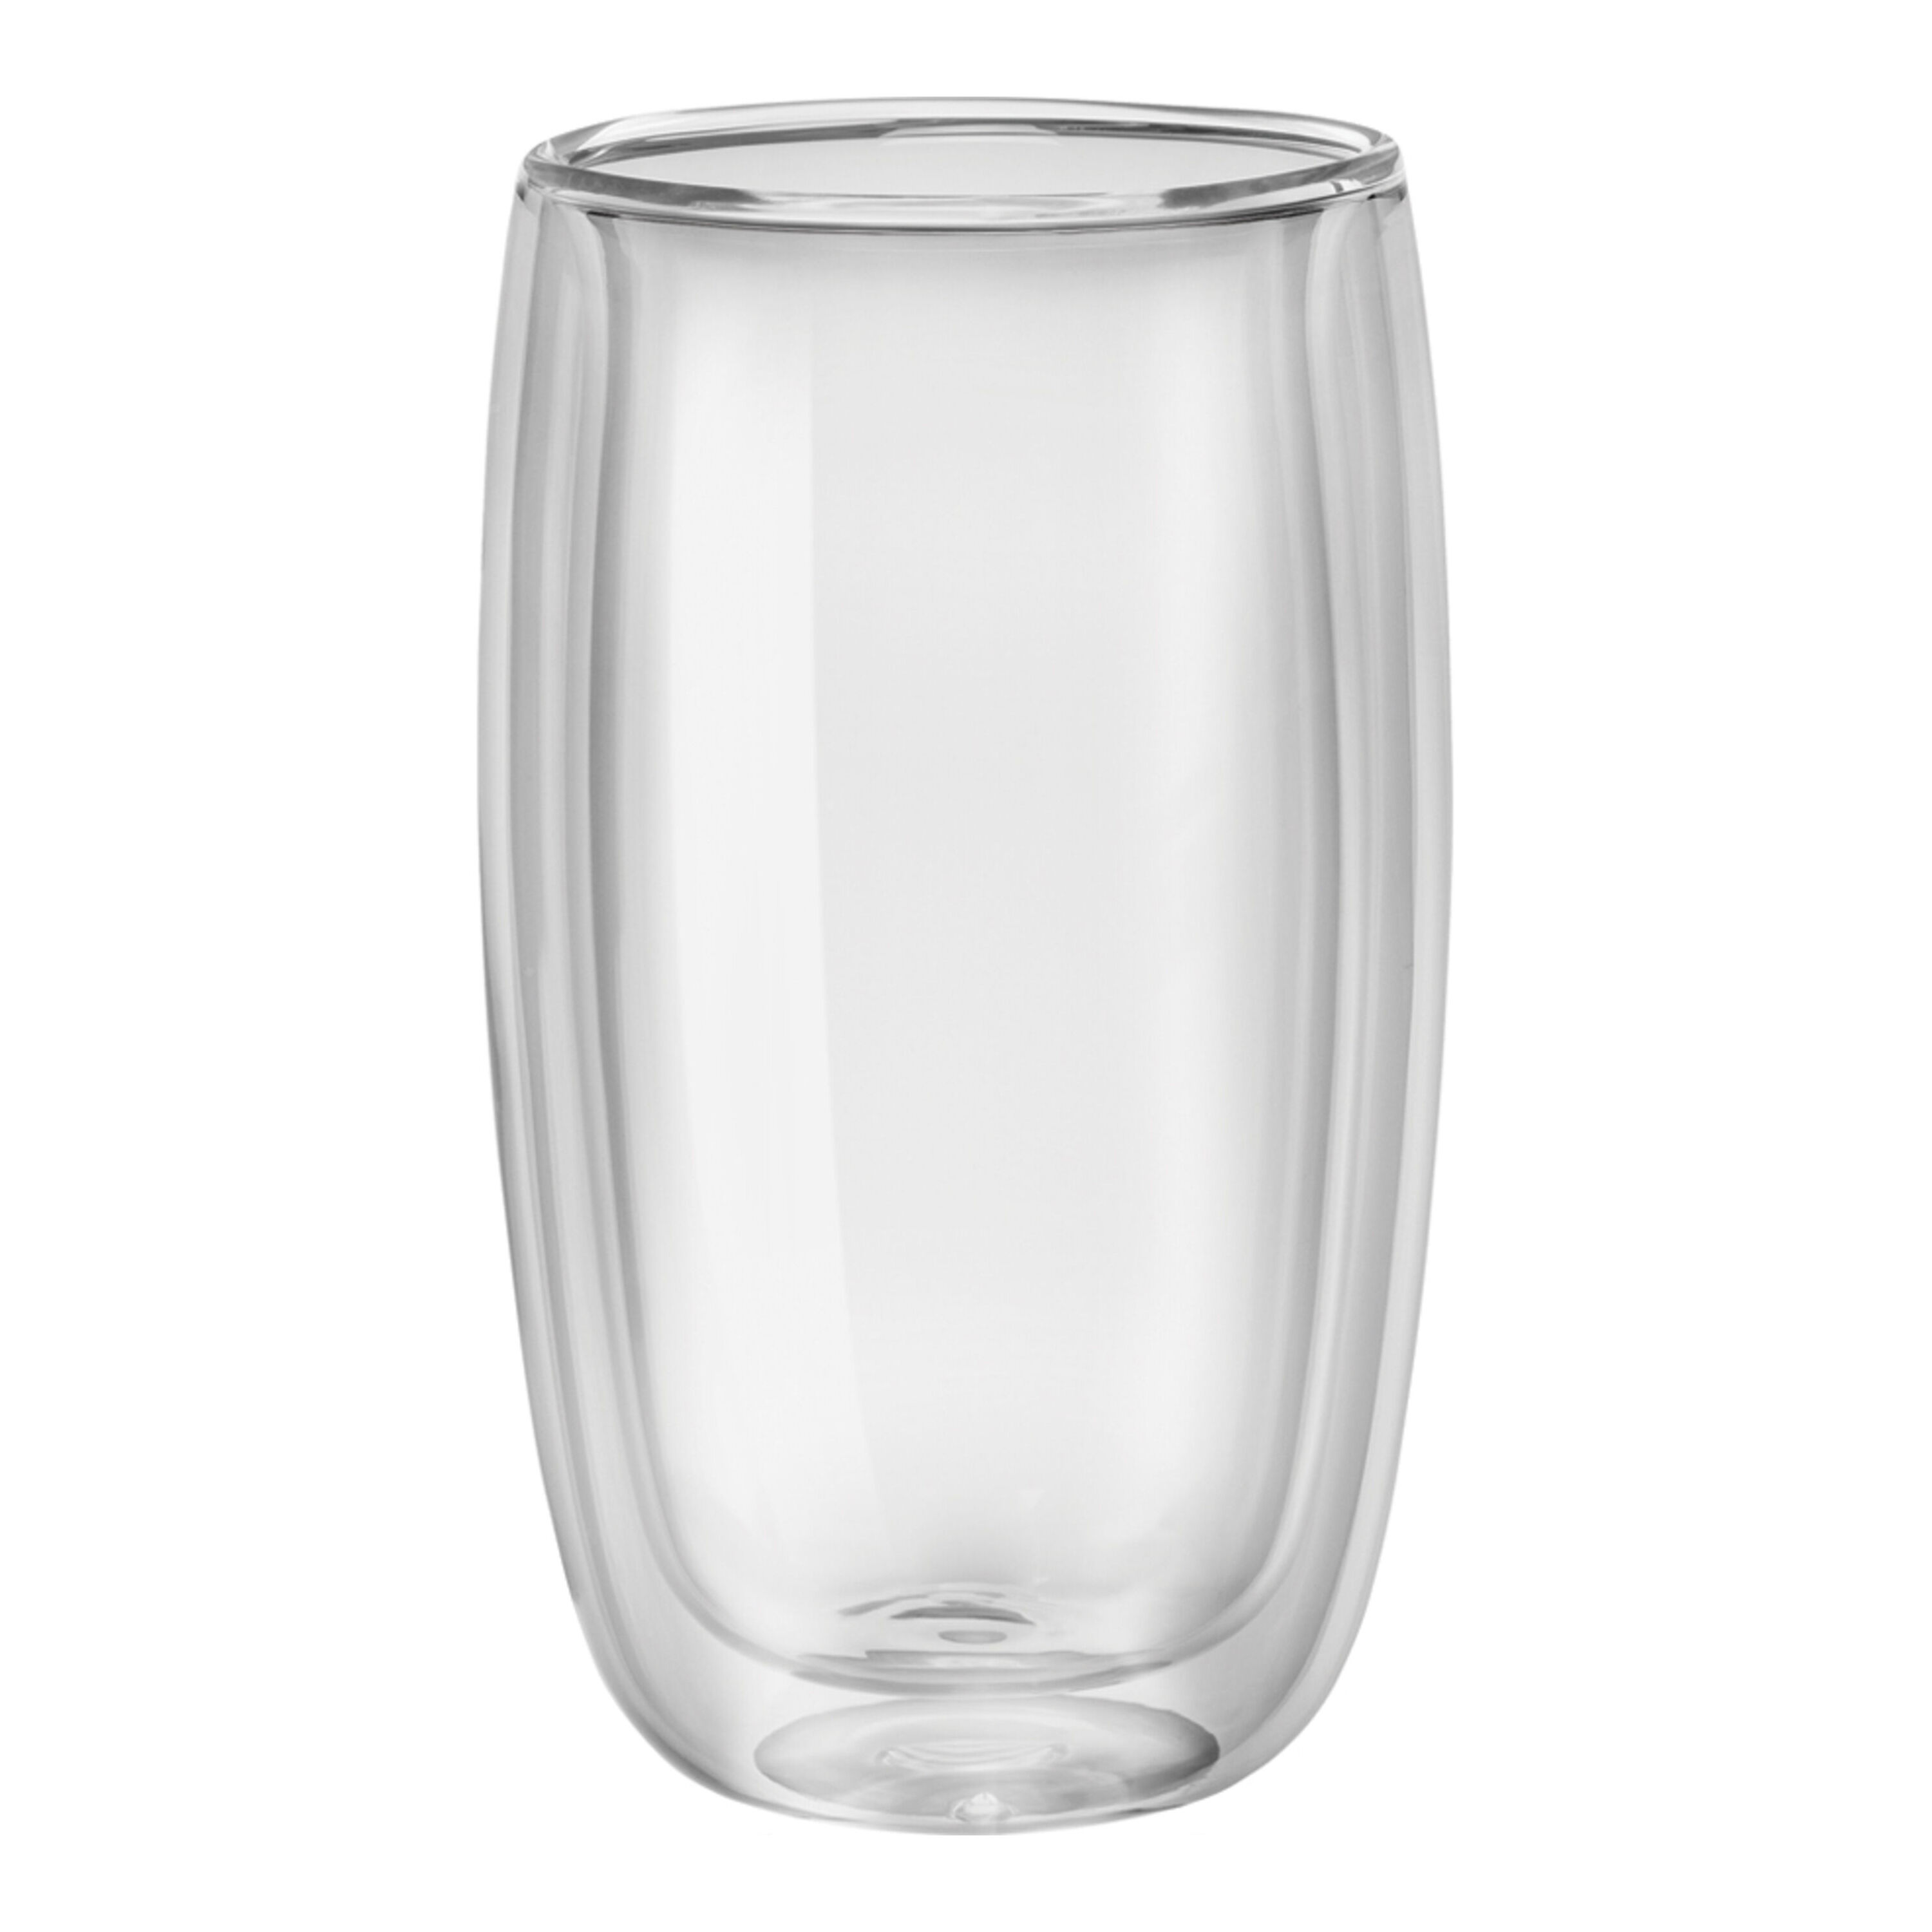  ZWILLING 39500-075 Double Wall Glass, Espresso Cup